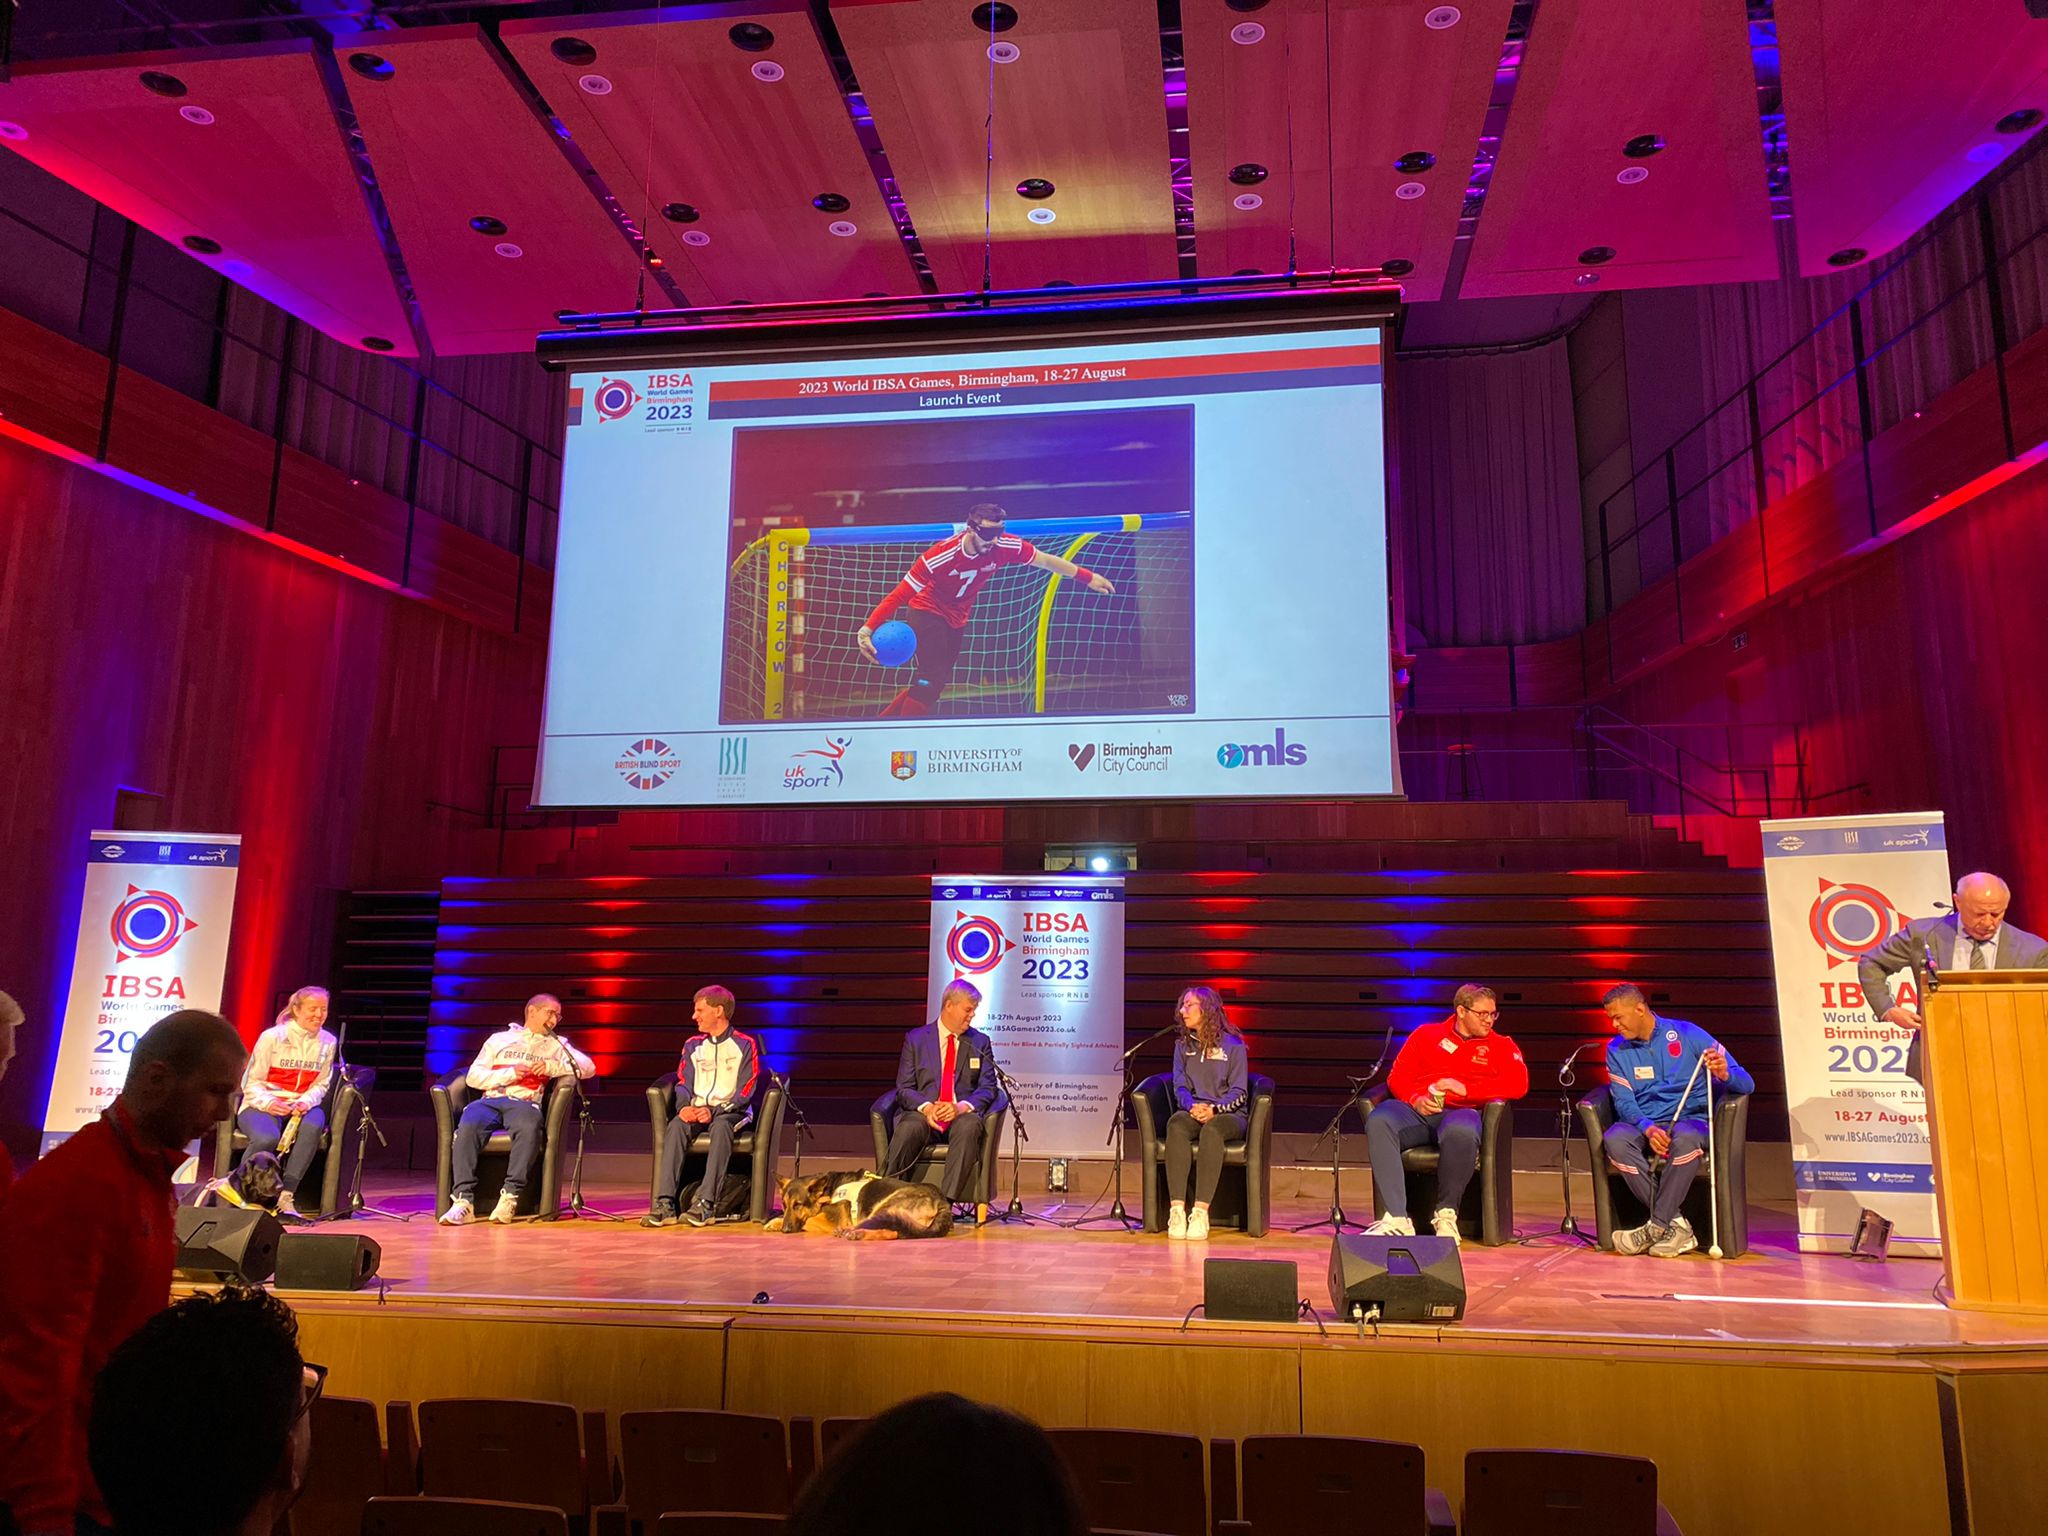 IBSA World Games launch with speakers on a stage, and goalball being showcased behind them on a large screen with Dan Roper playing for GB in view.